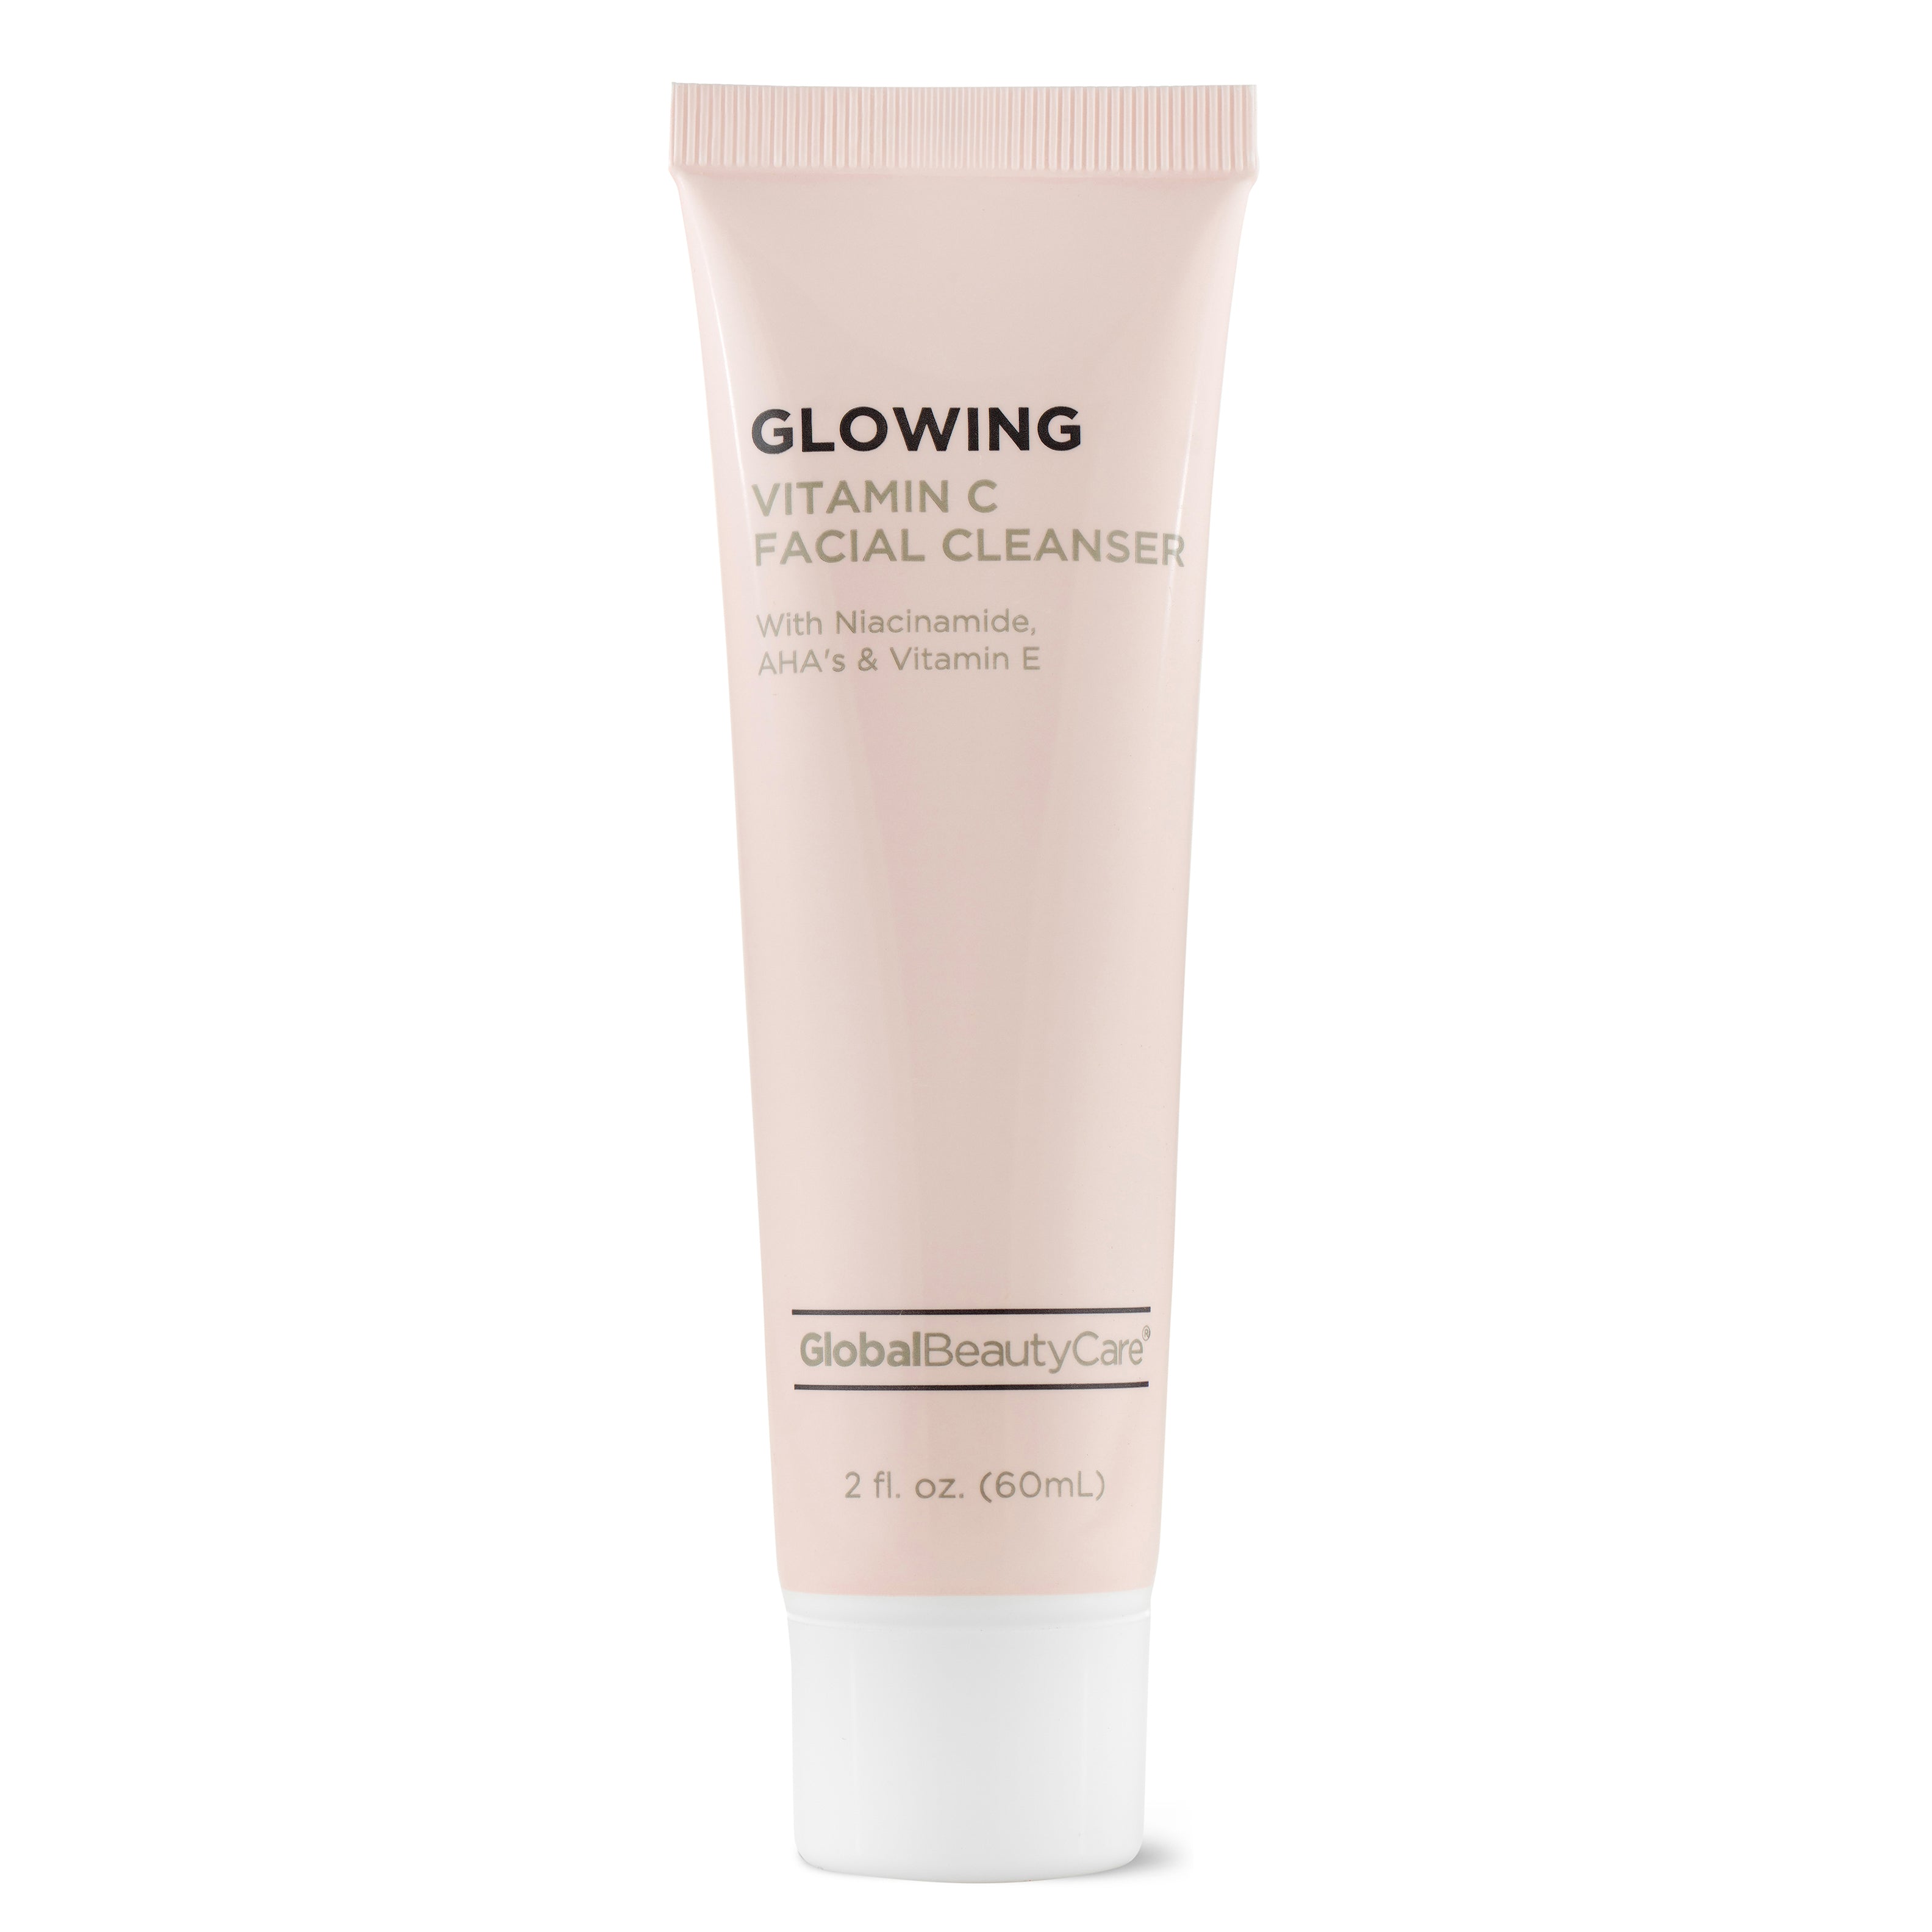 Glowing Vitamin C Facial Cleanser